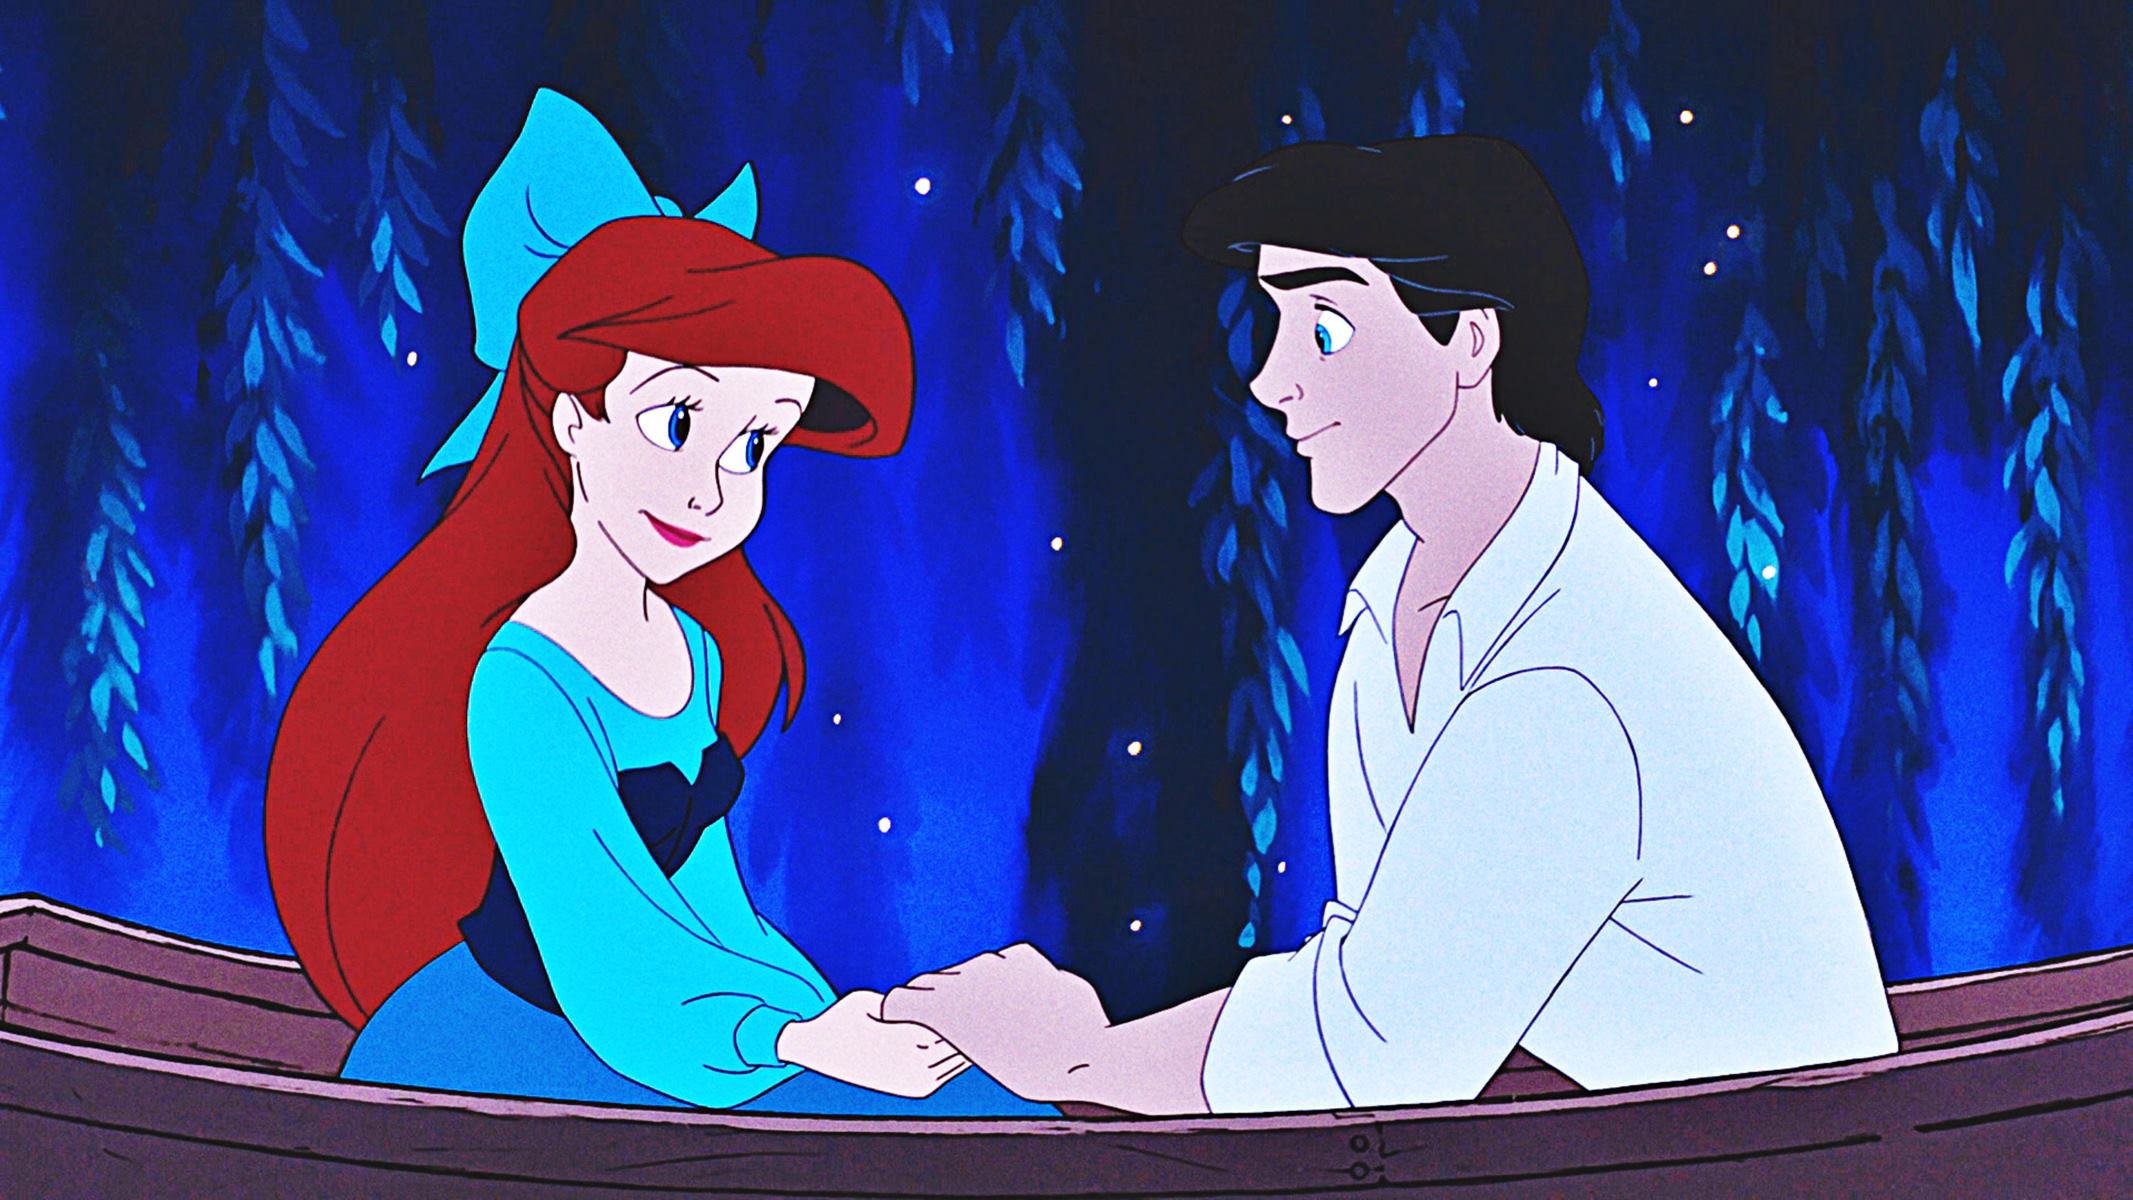 The Surprising Ages Of Disney Princesses And Princes Revealed!